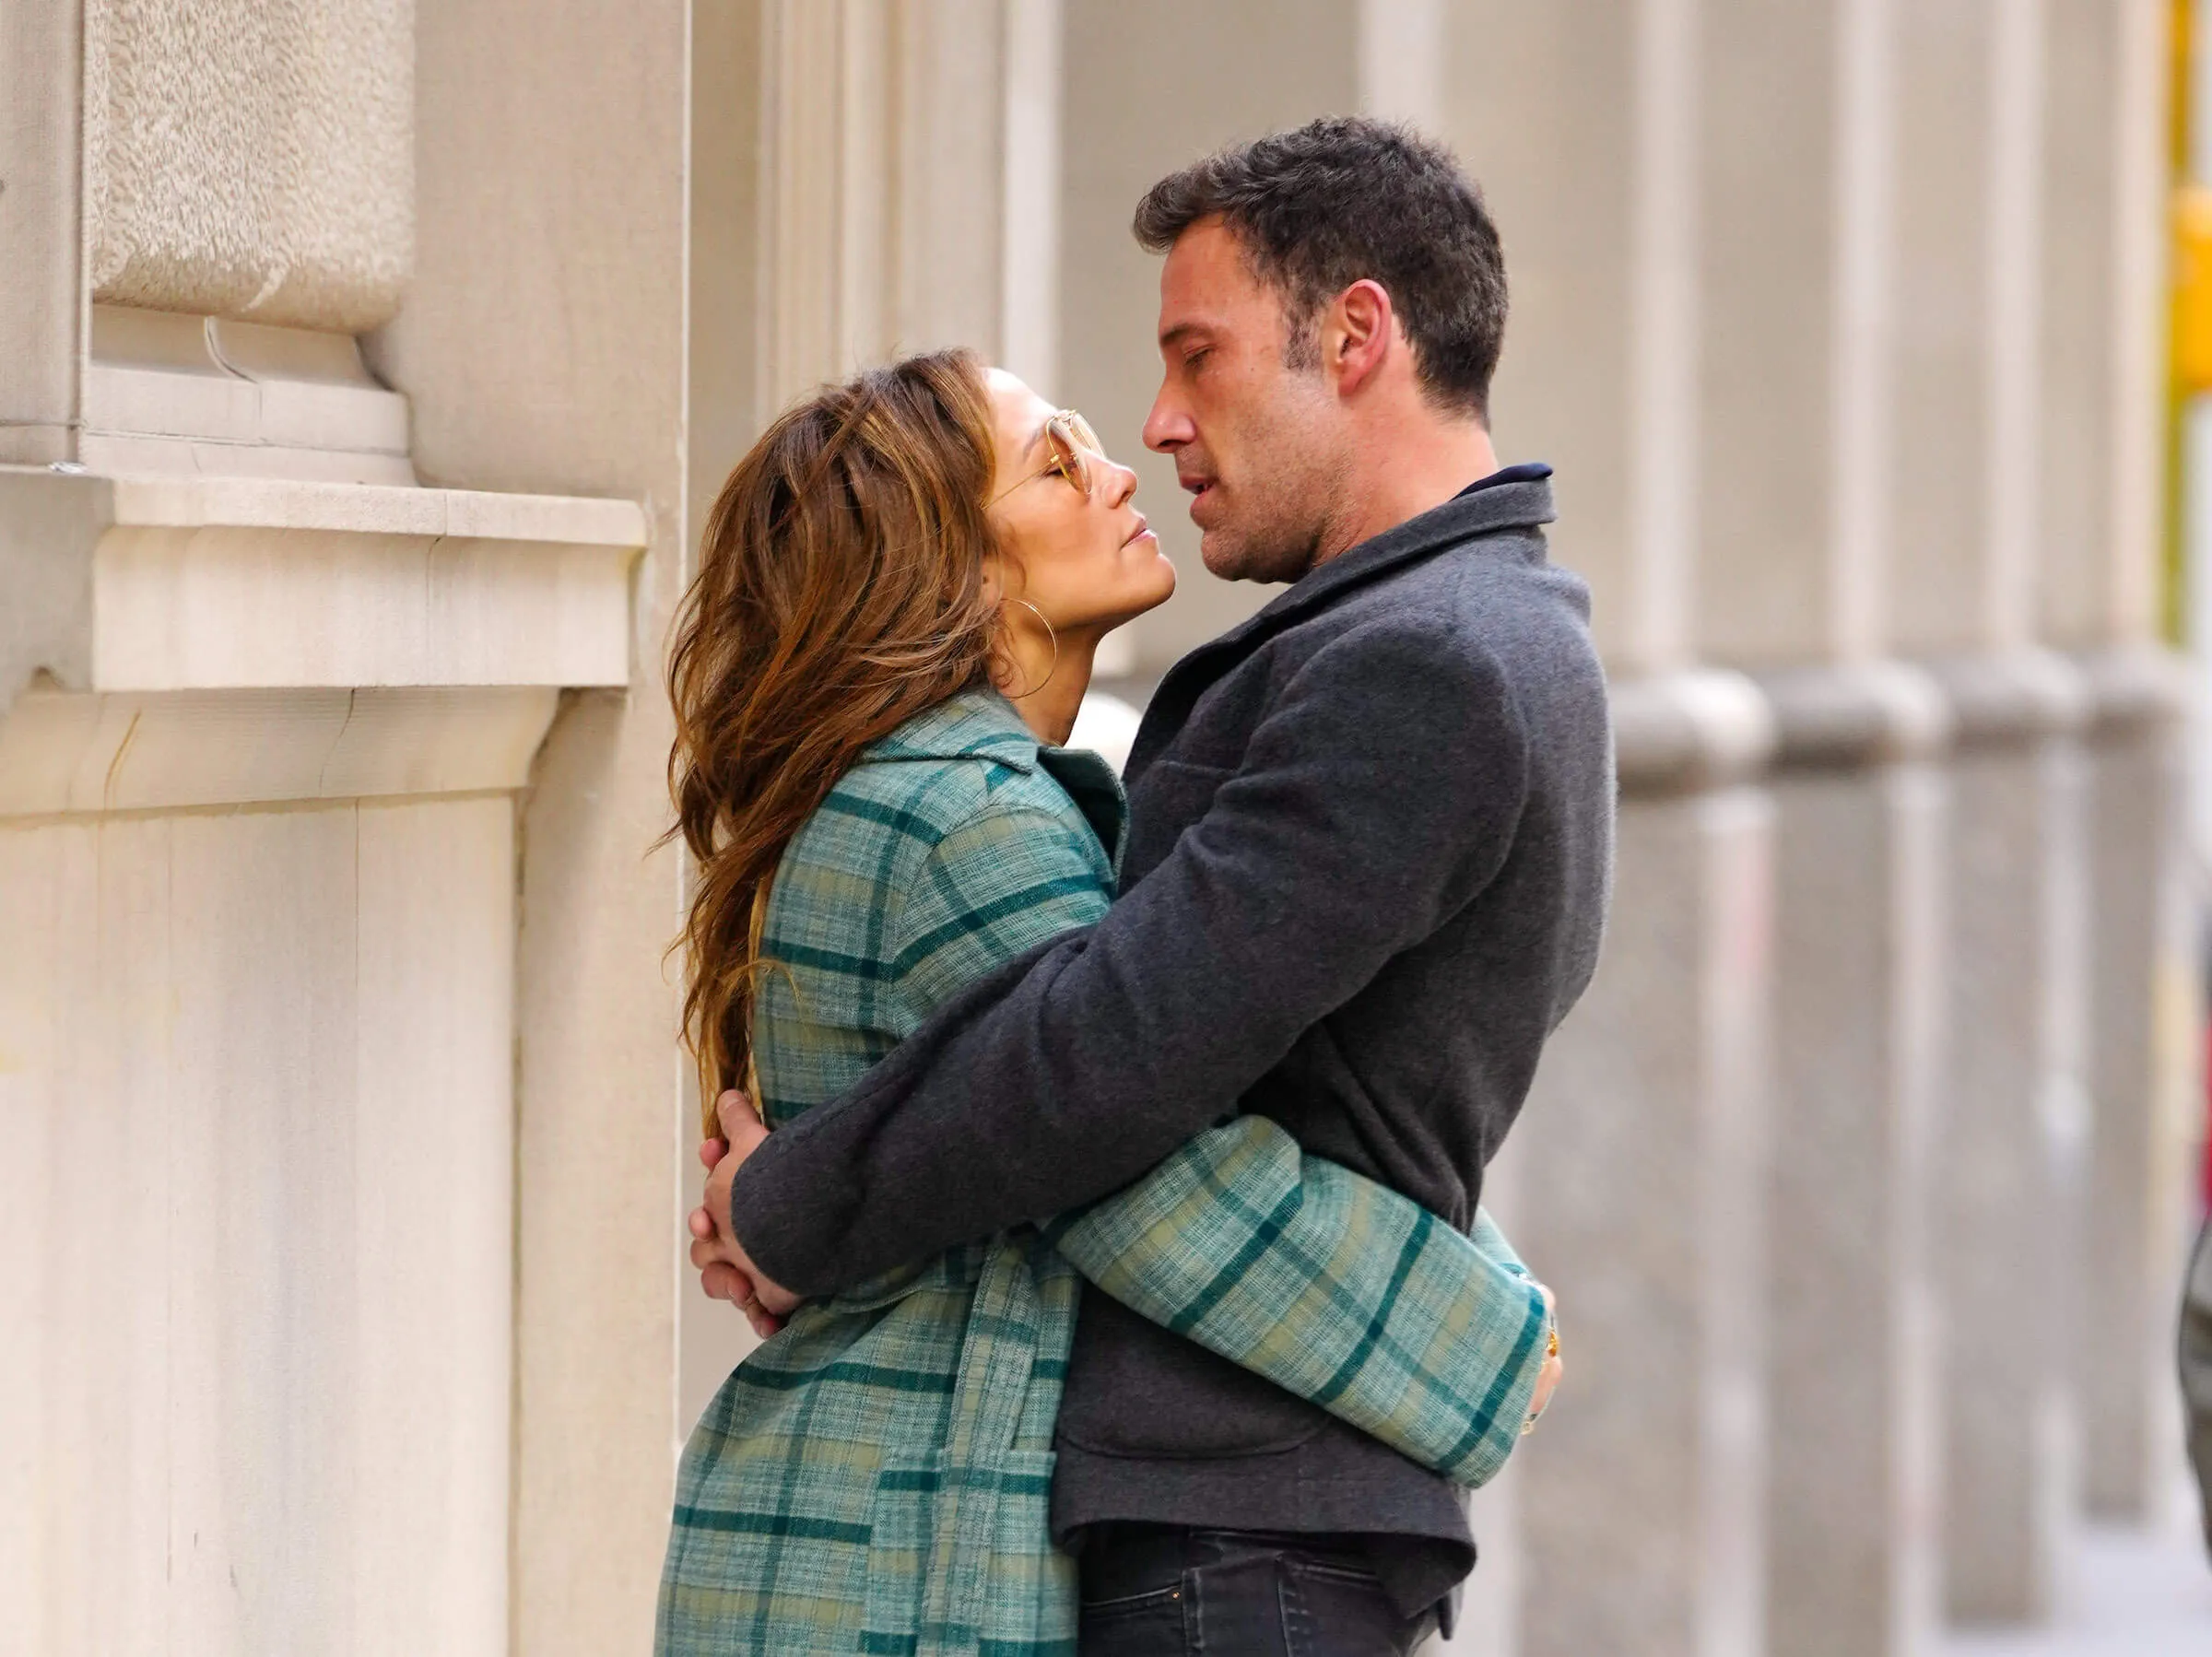 Jennifer Lopez and Ben Affleck embracing in New York in 2021. Lopez is wearing a green plaid coat.